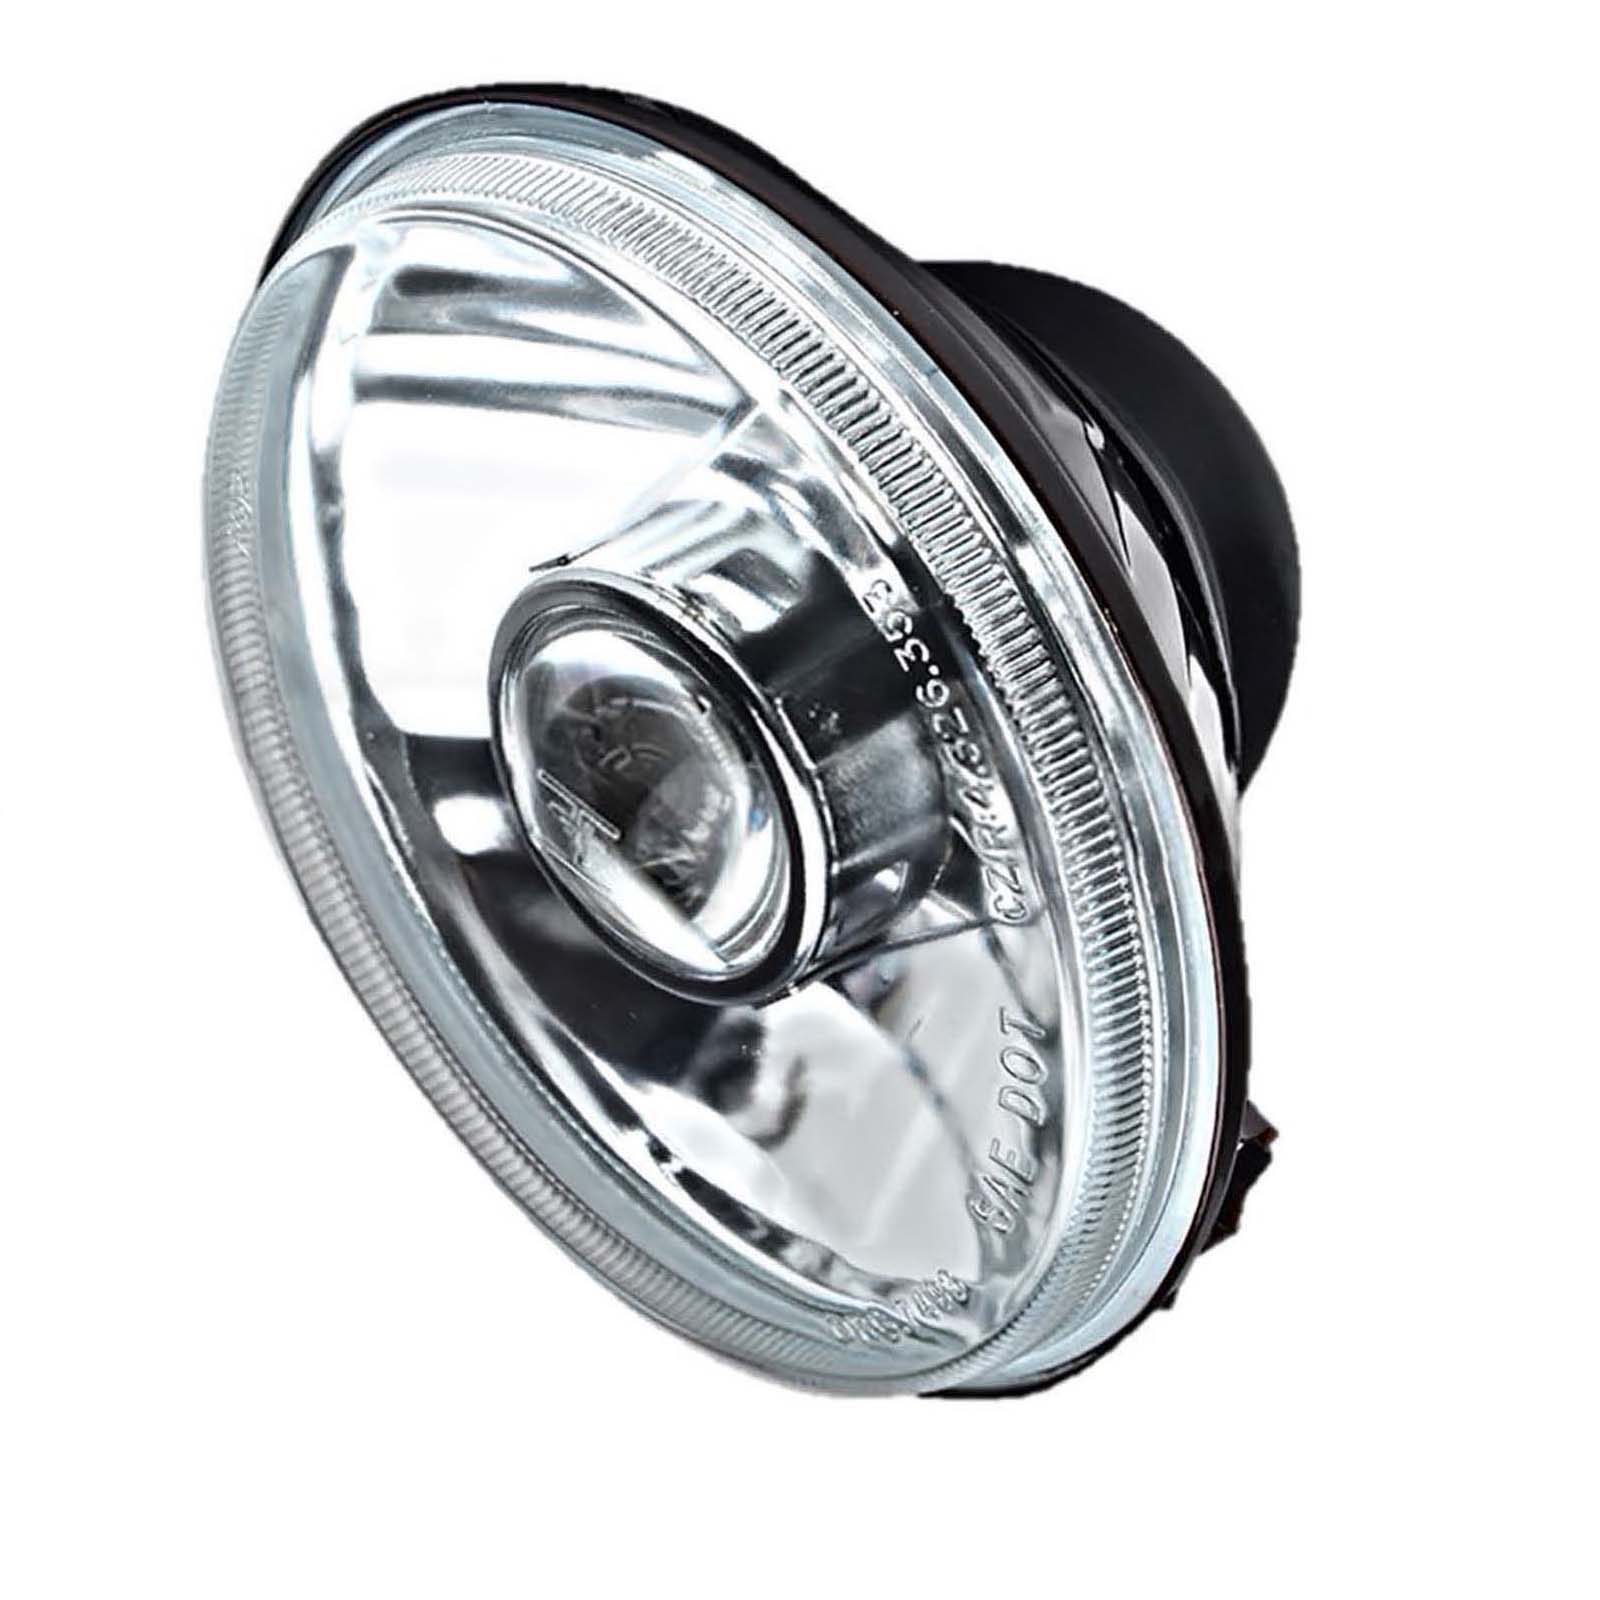 best led projector headlights